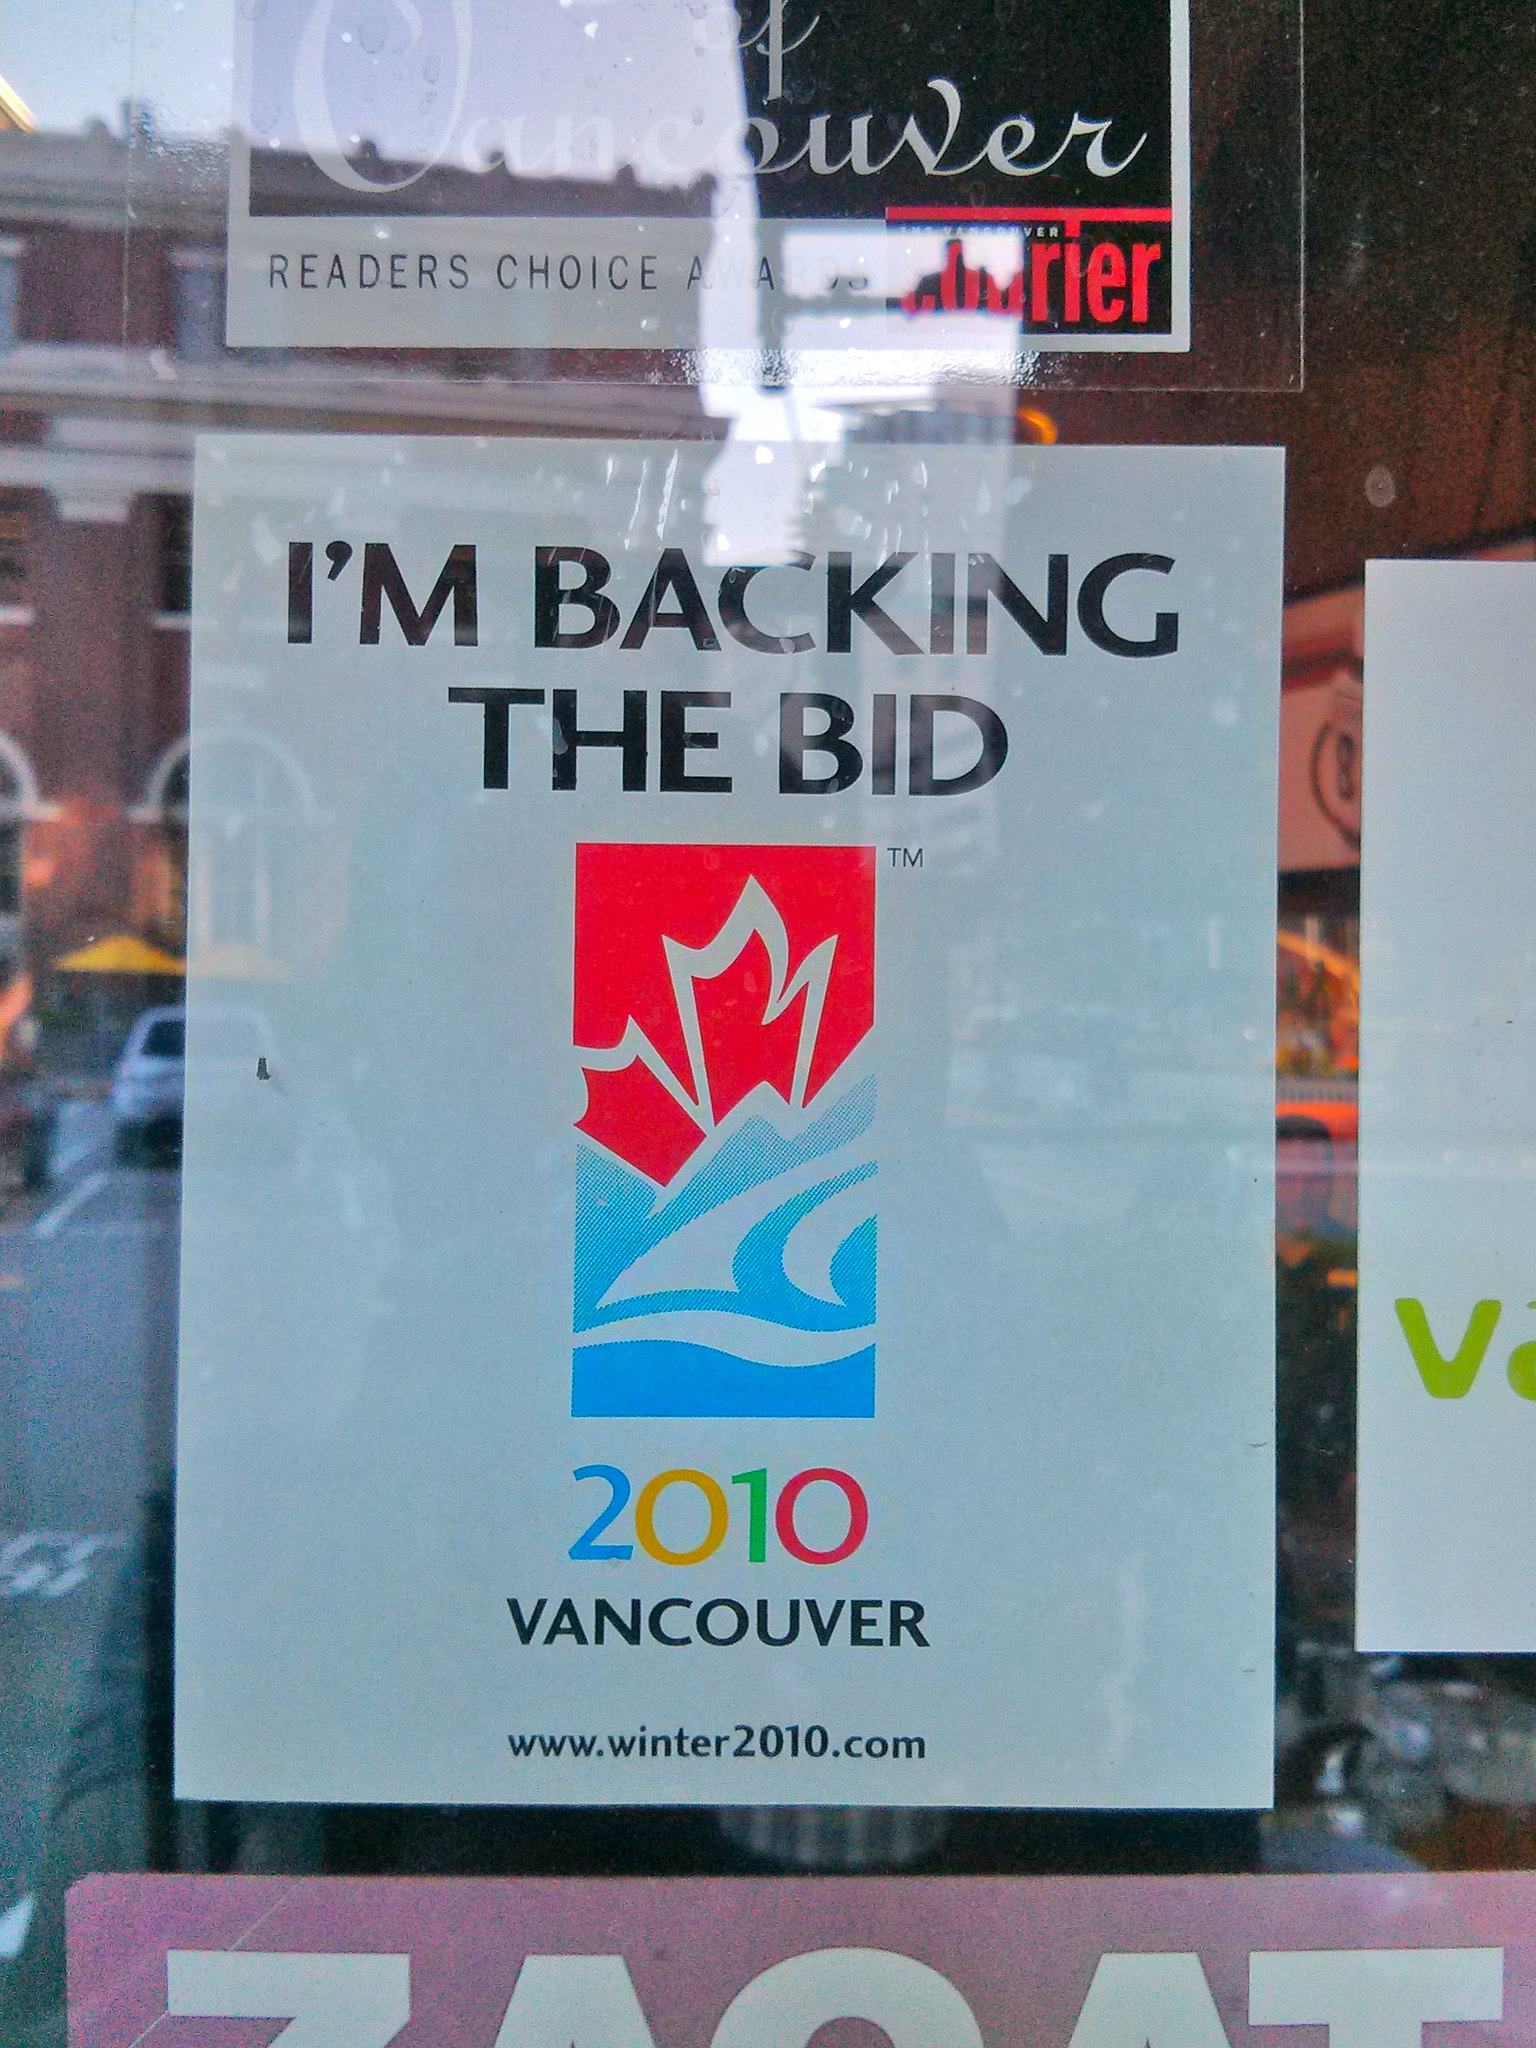 A sign posted on a window reads, "I'm backing the bid. 2010 Vancouver."